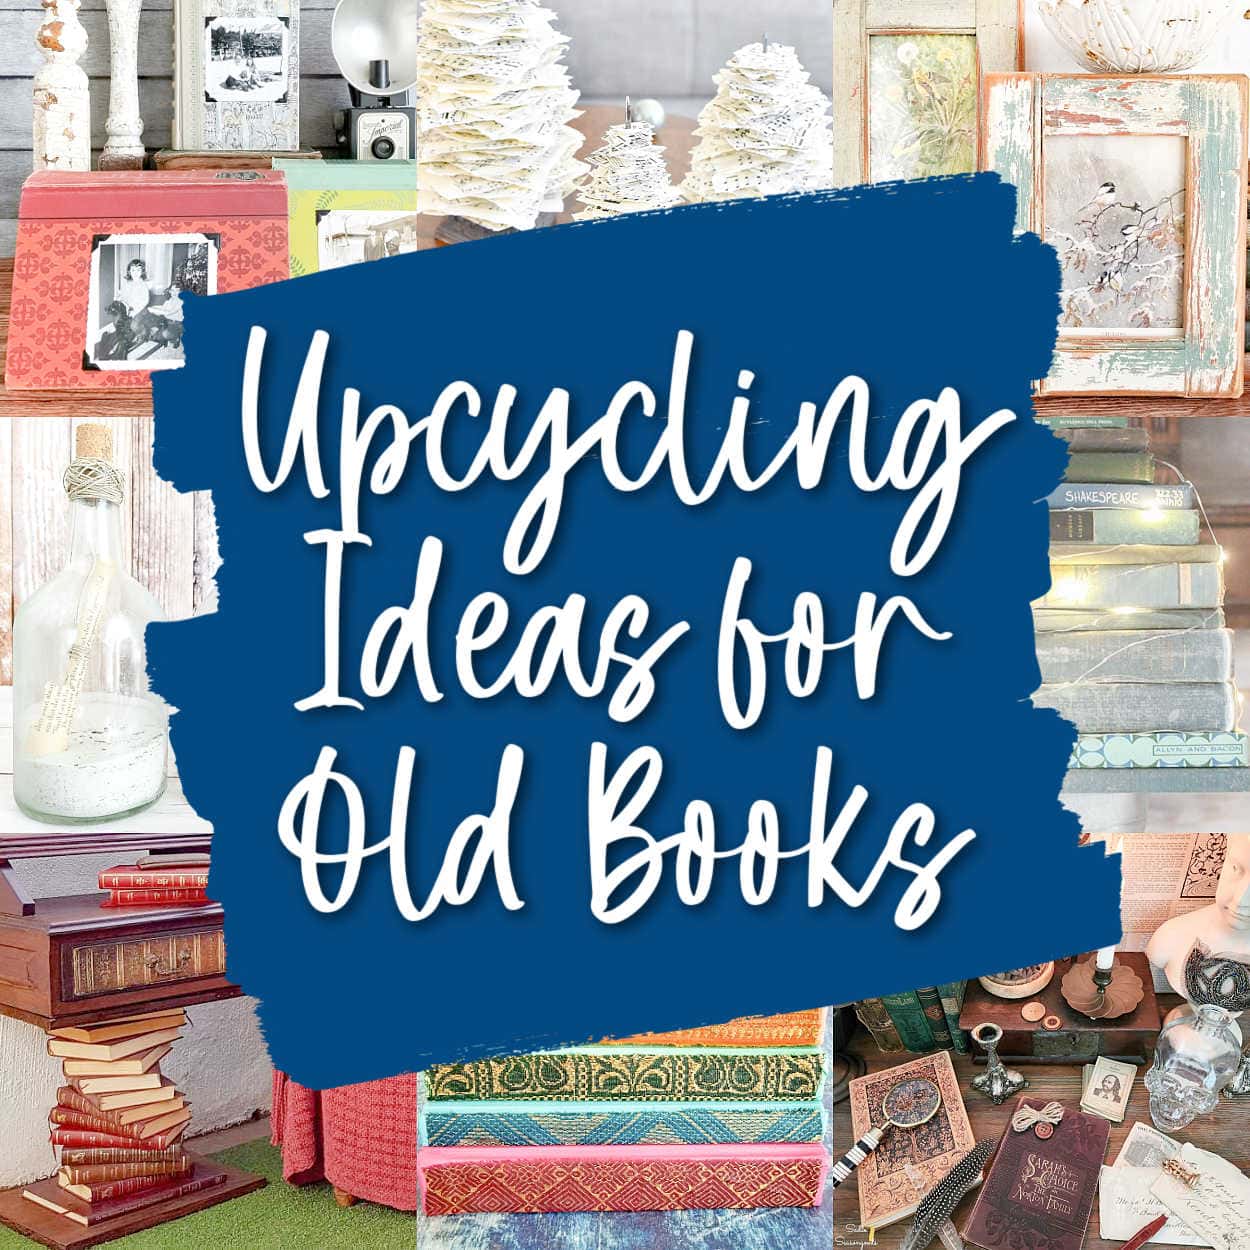 Ideas and projects for upcycling books